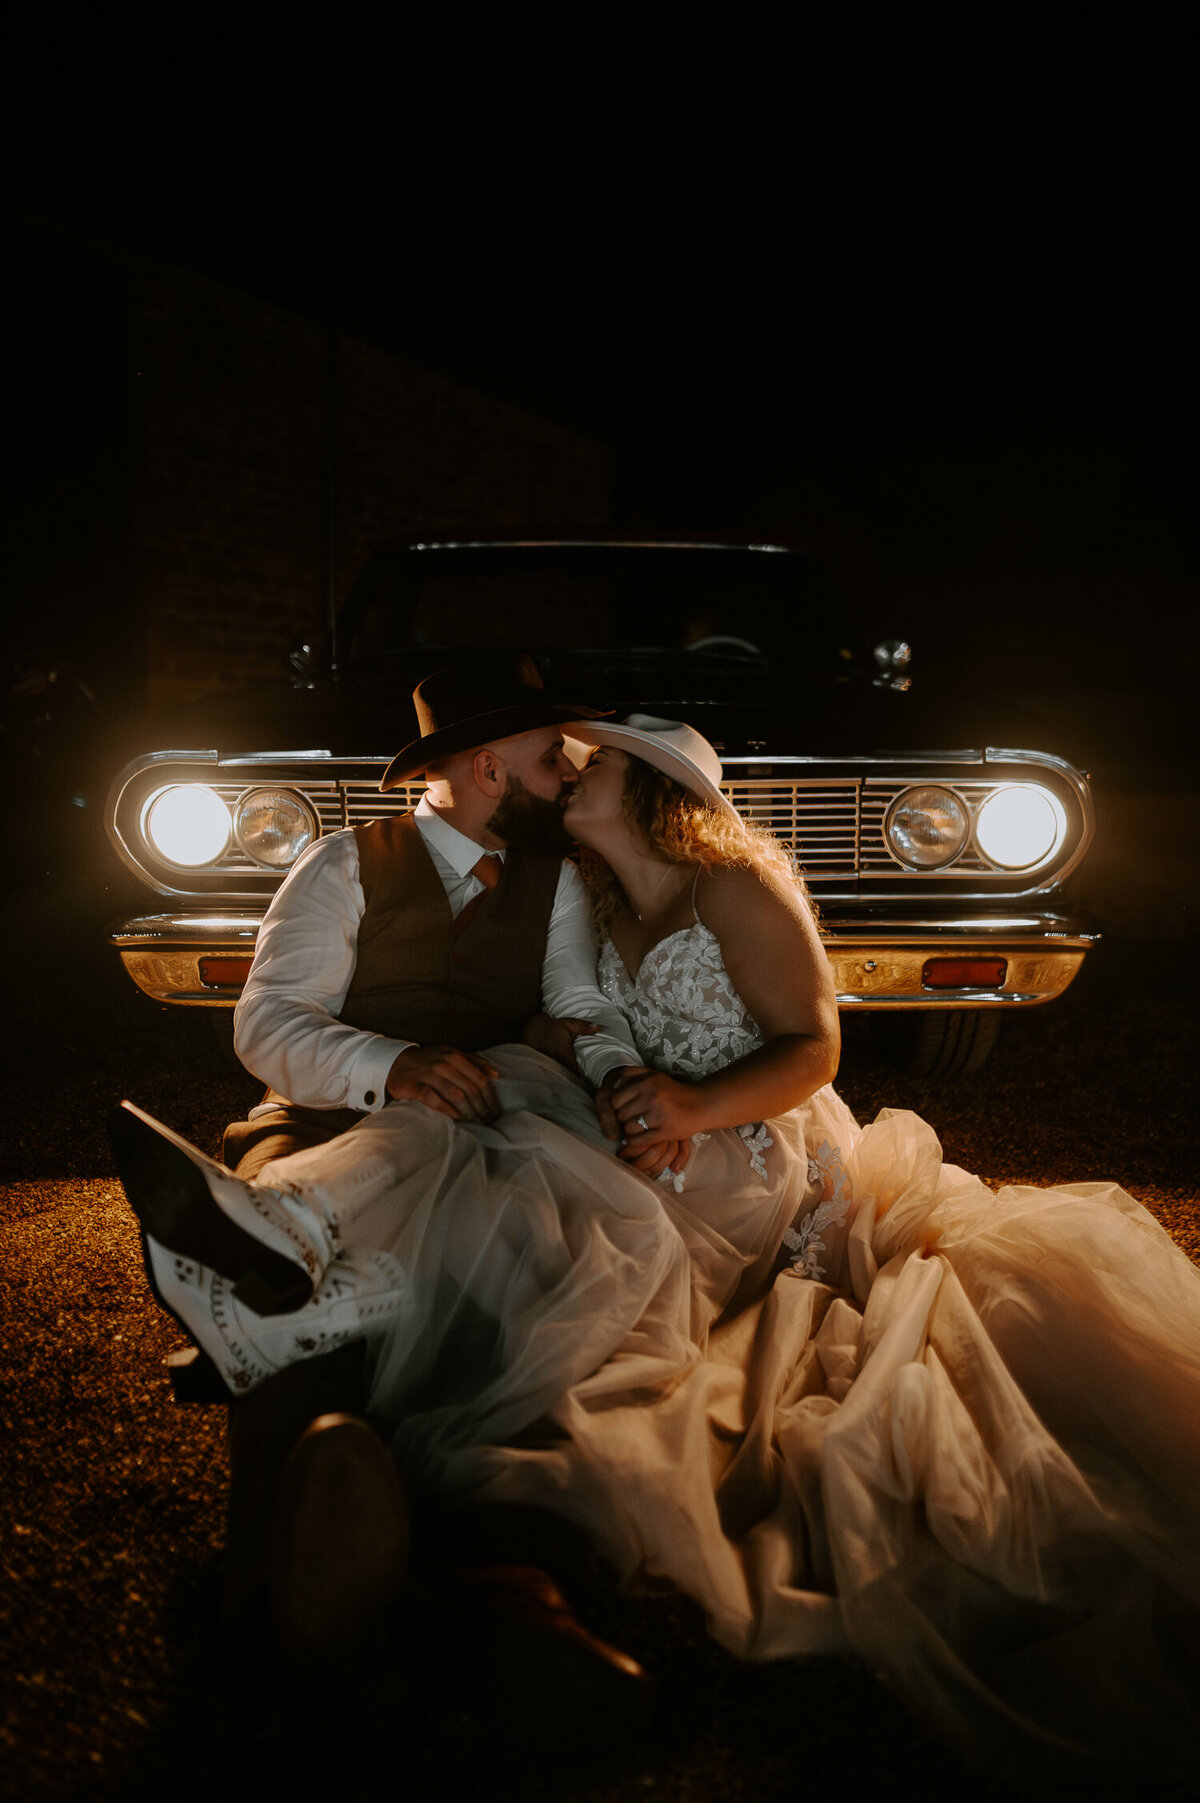 A bride and groom wearing cowboy hats and boots sat inform of an El Camino with its headlights on at night.